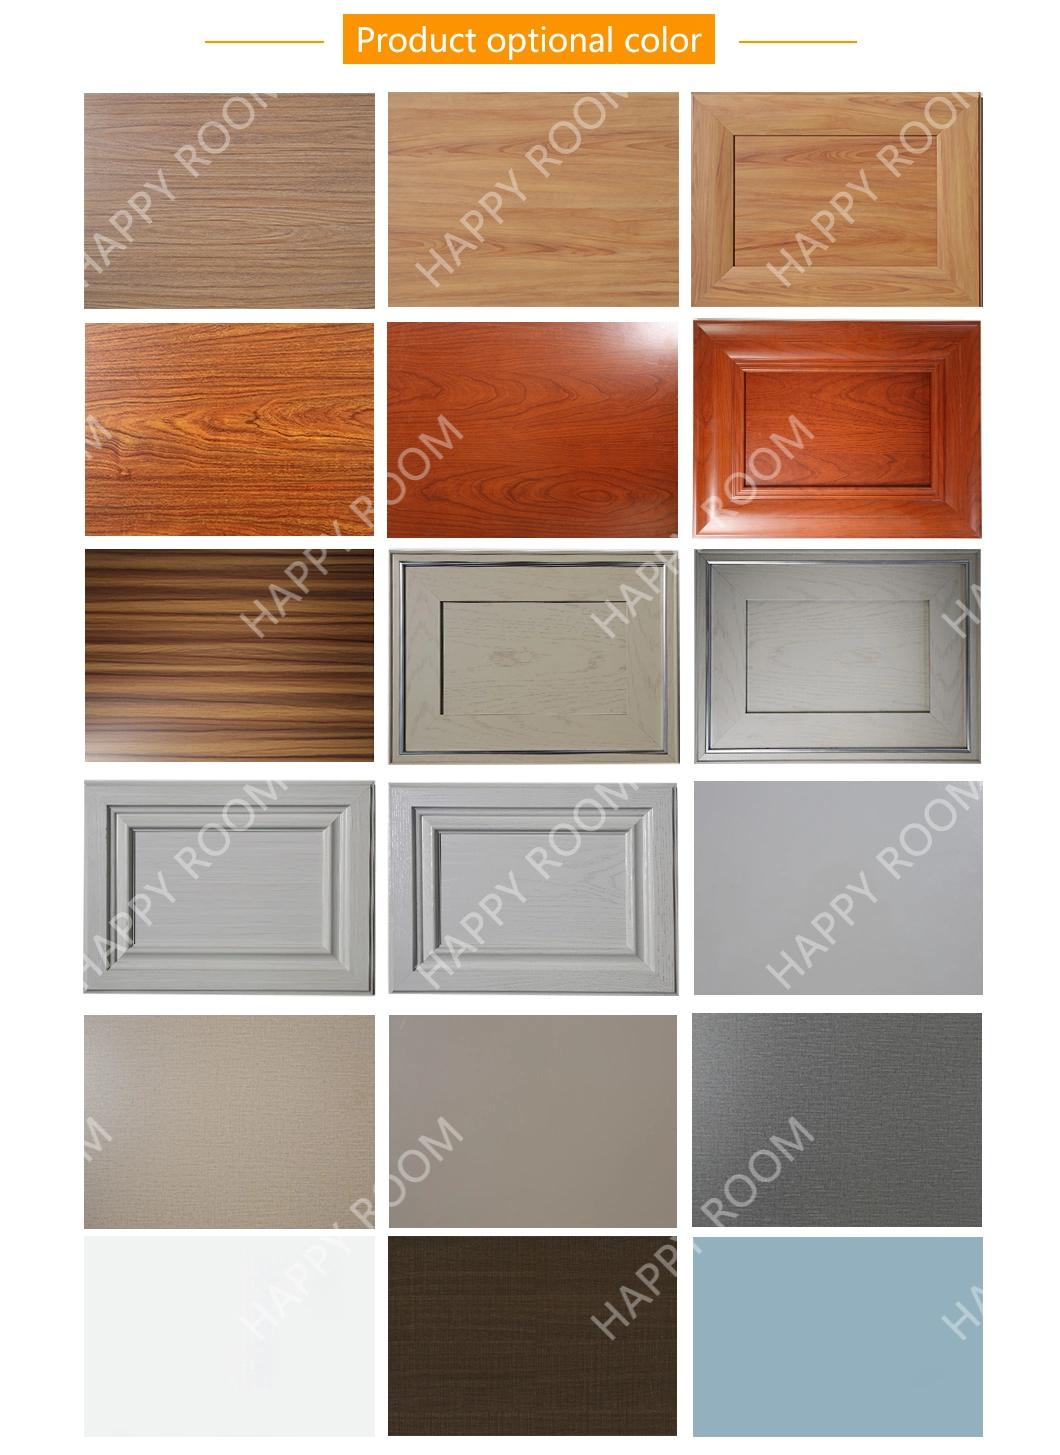 2021 Happyroom Wooden Color Cabinet Made by Aluminium Aluminum Profile Used for Kitchen Furniture